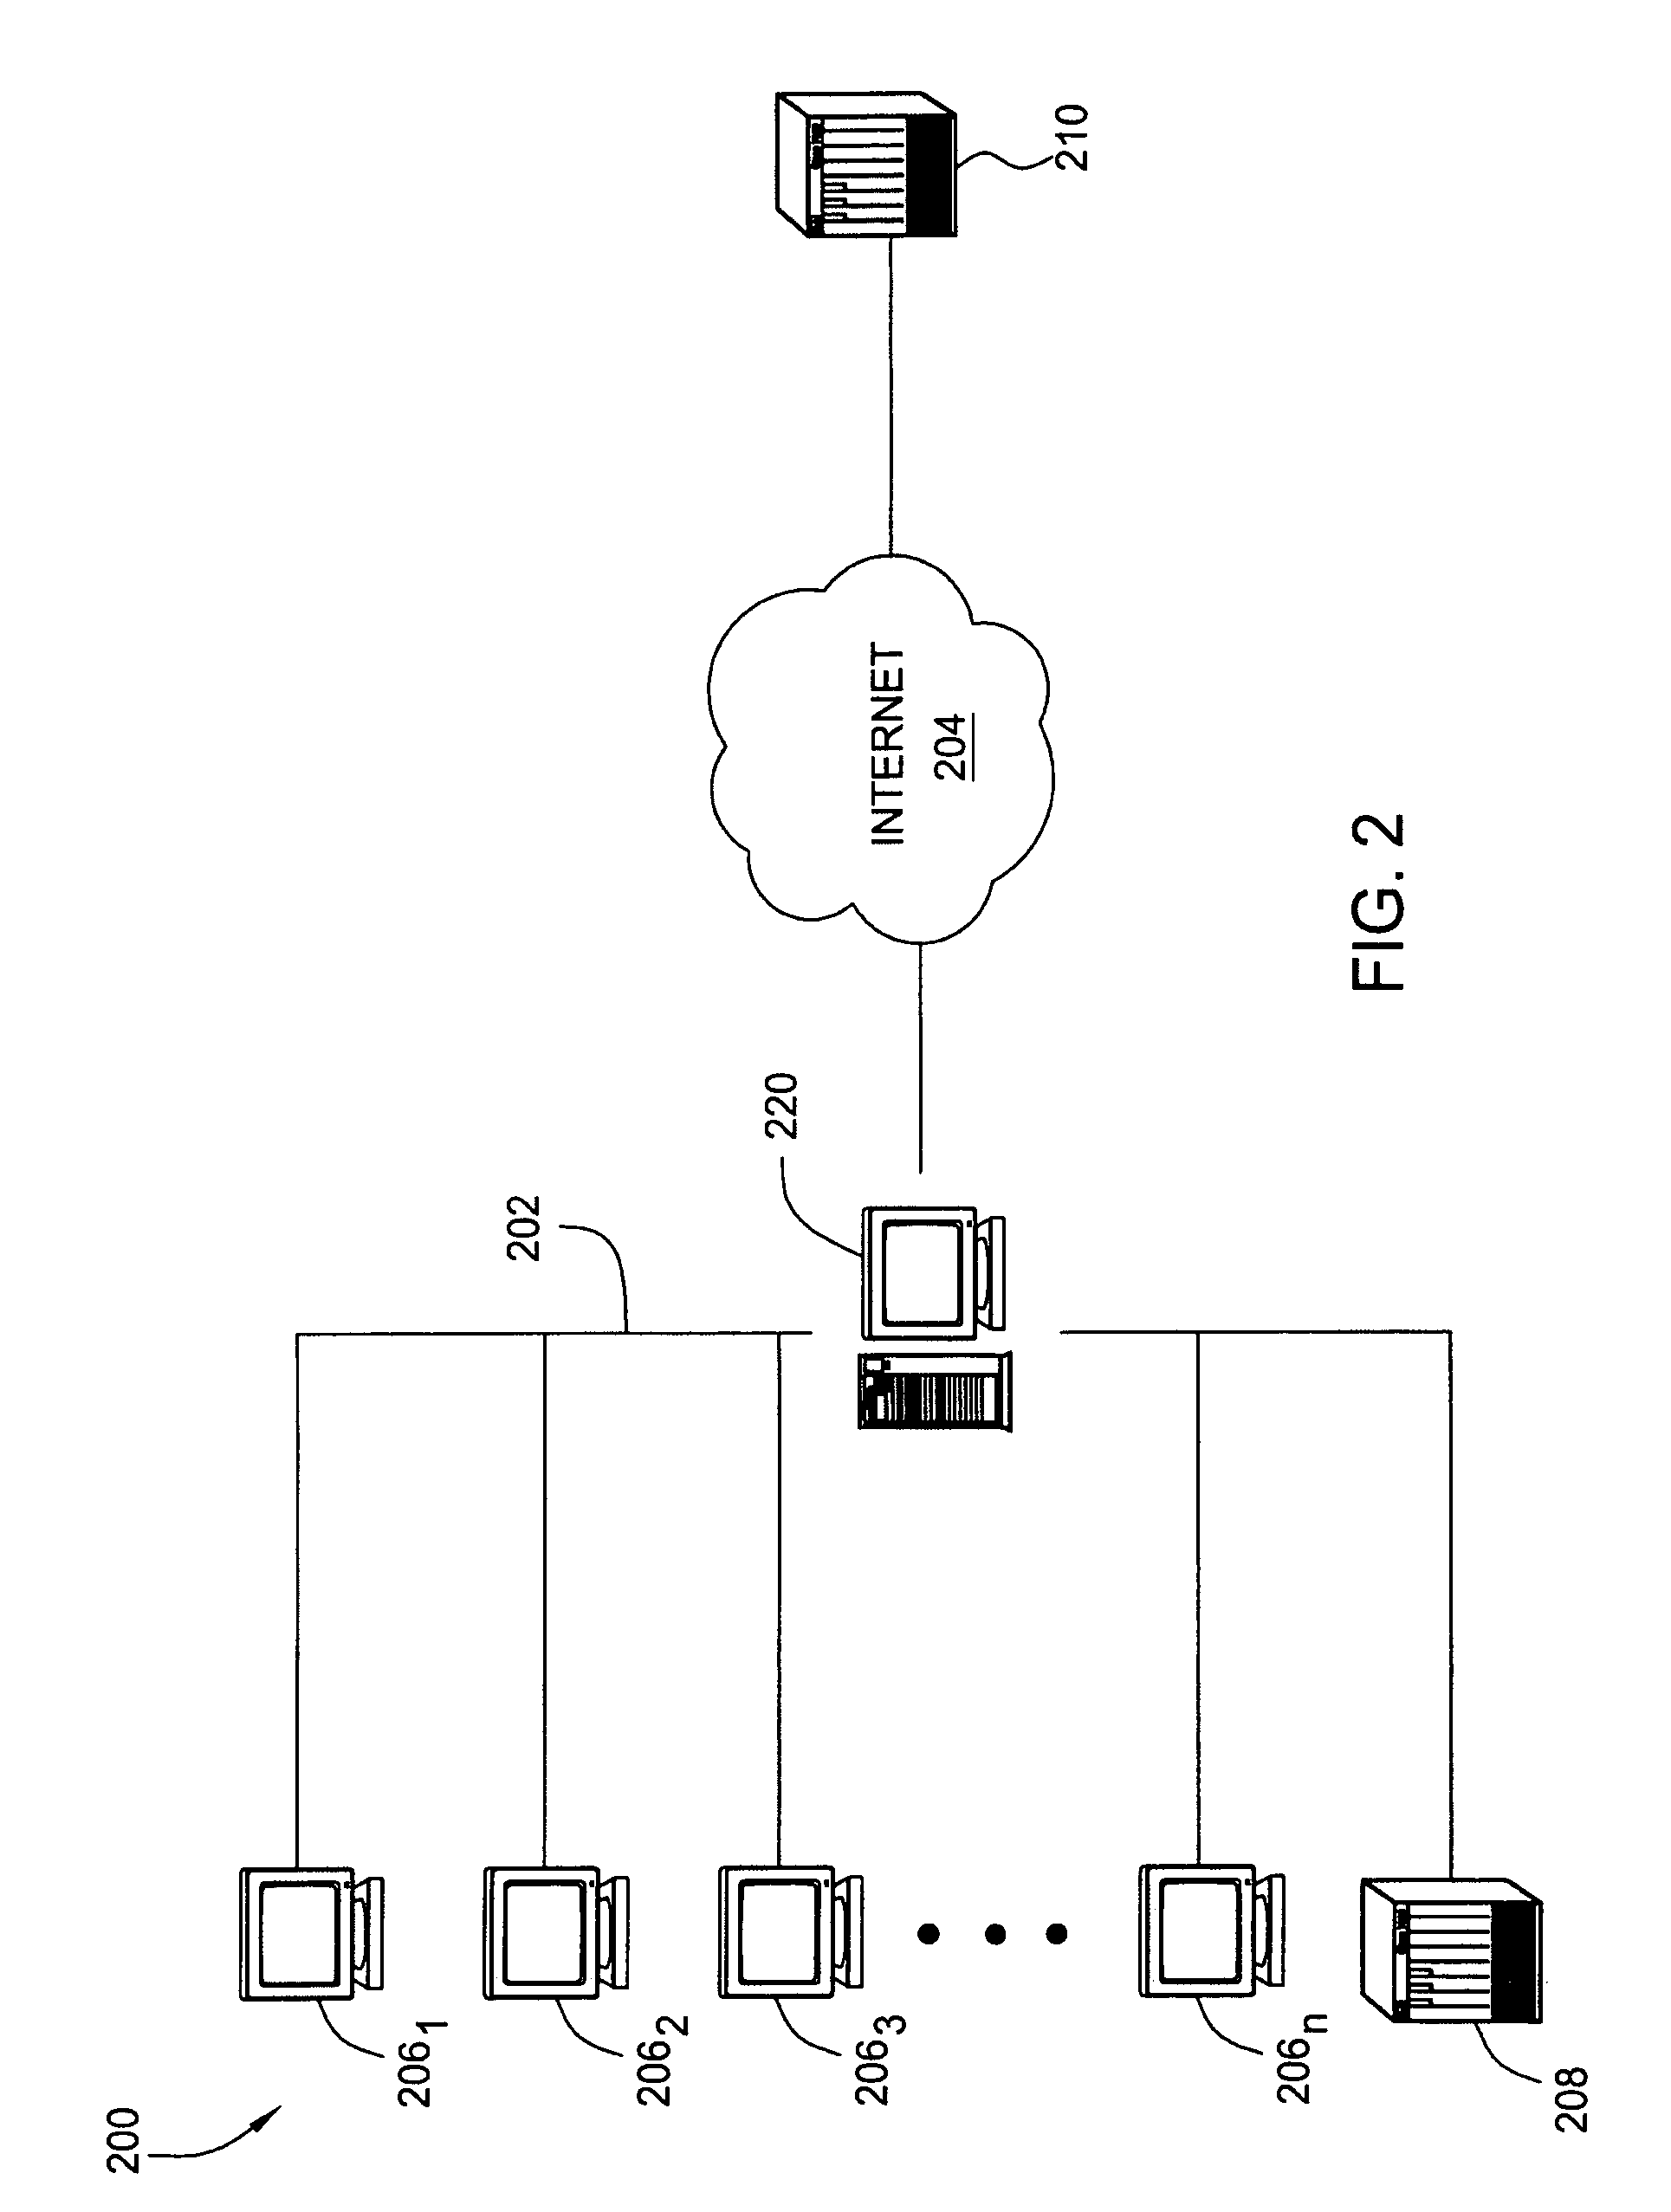 Method and apparatus for DNS pre-fetching for multiple clients